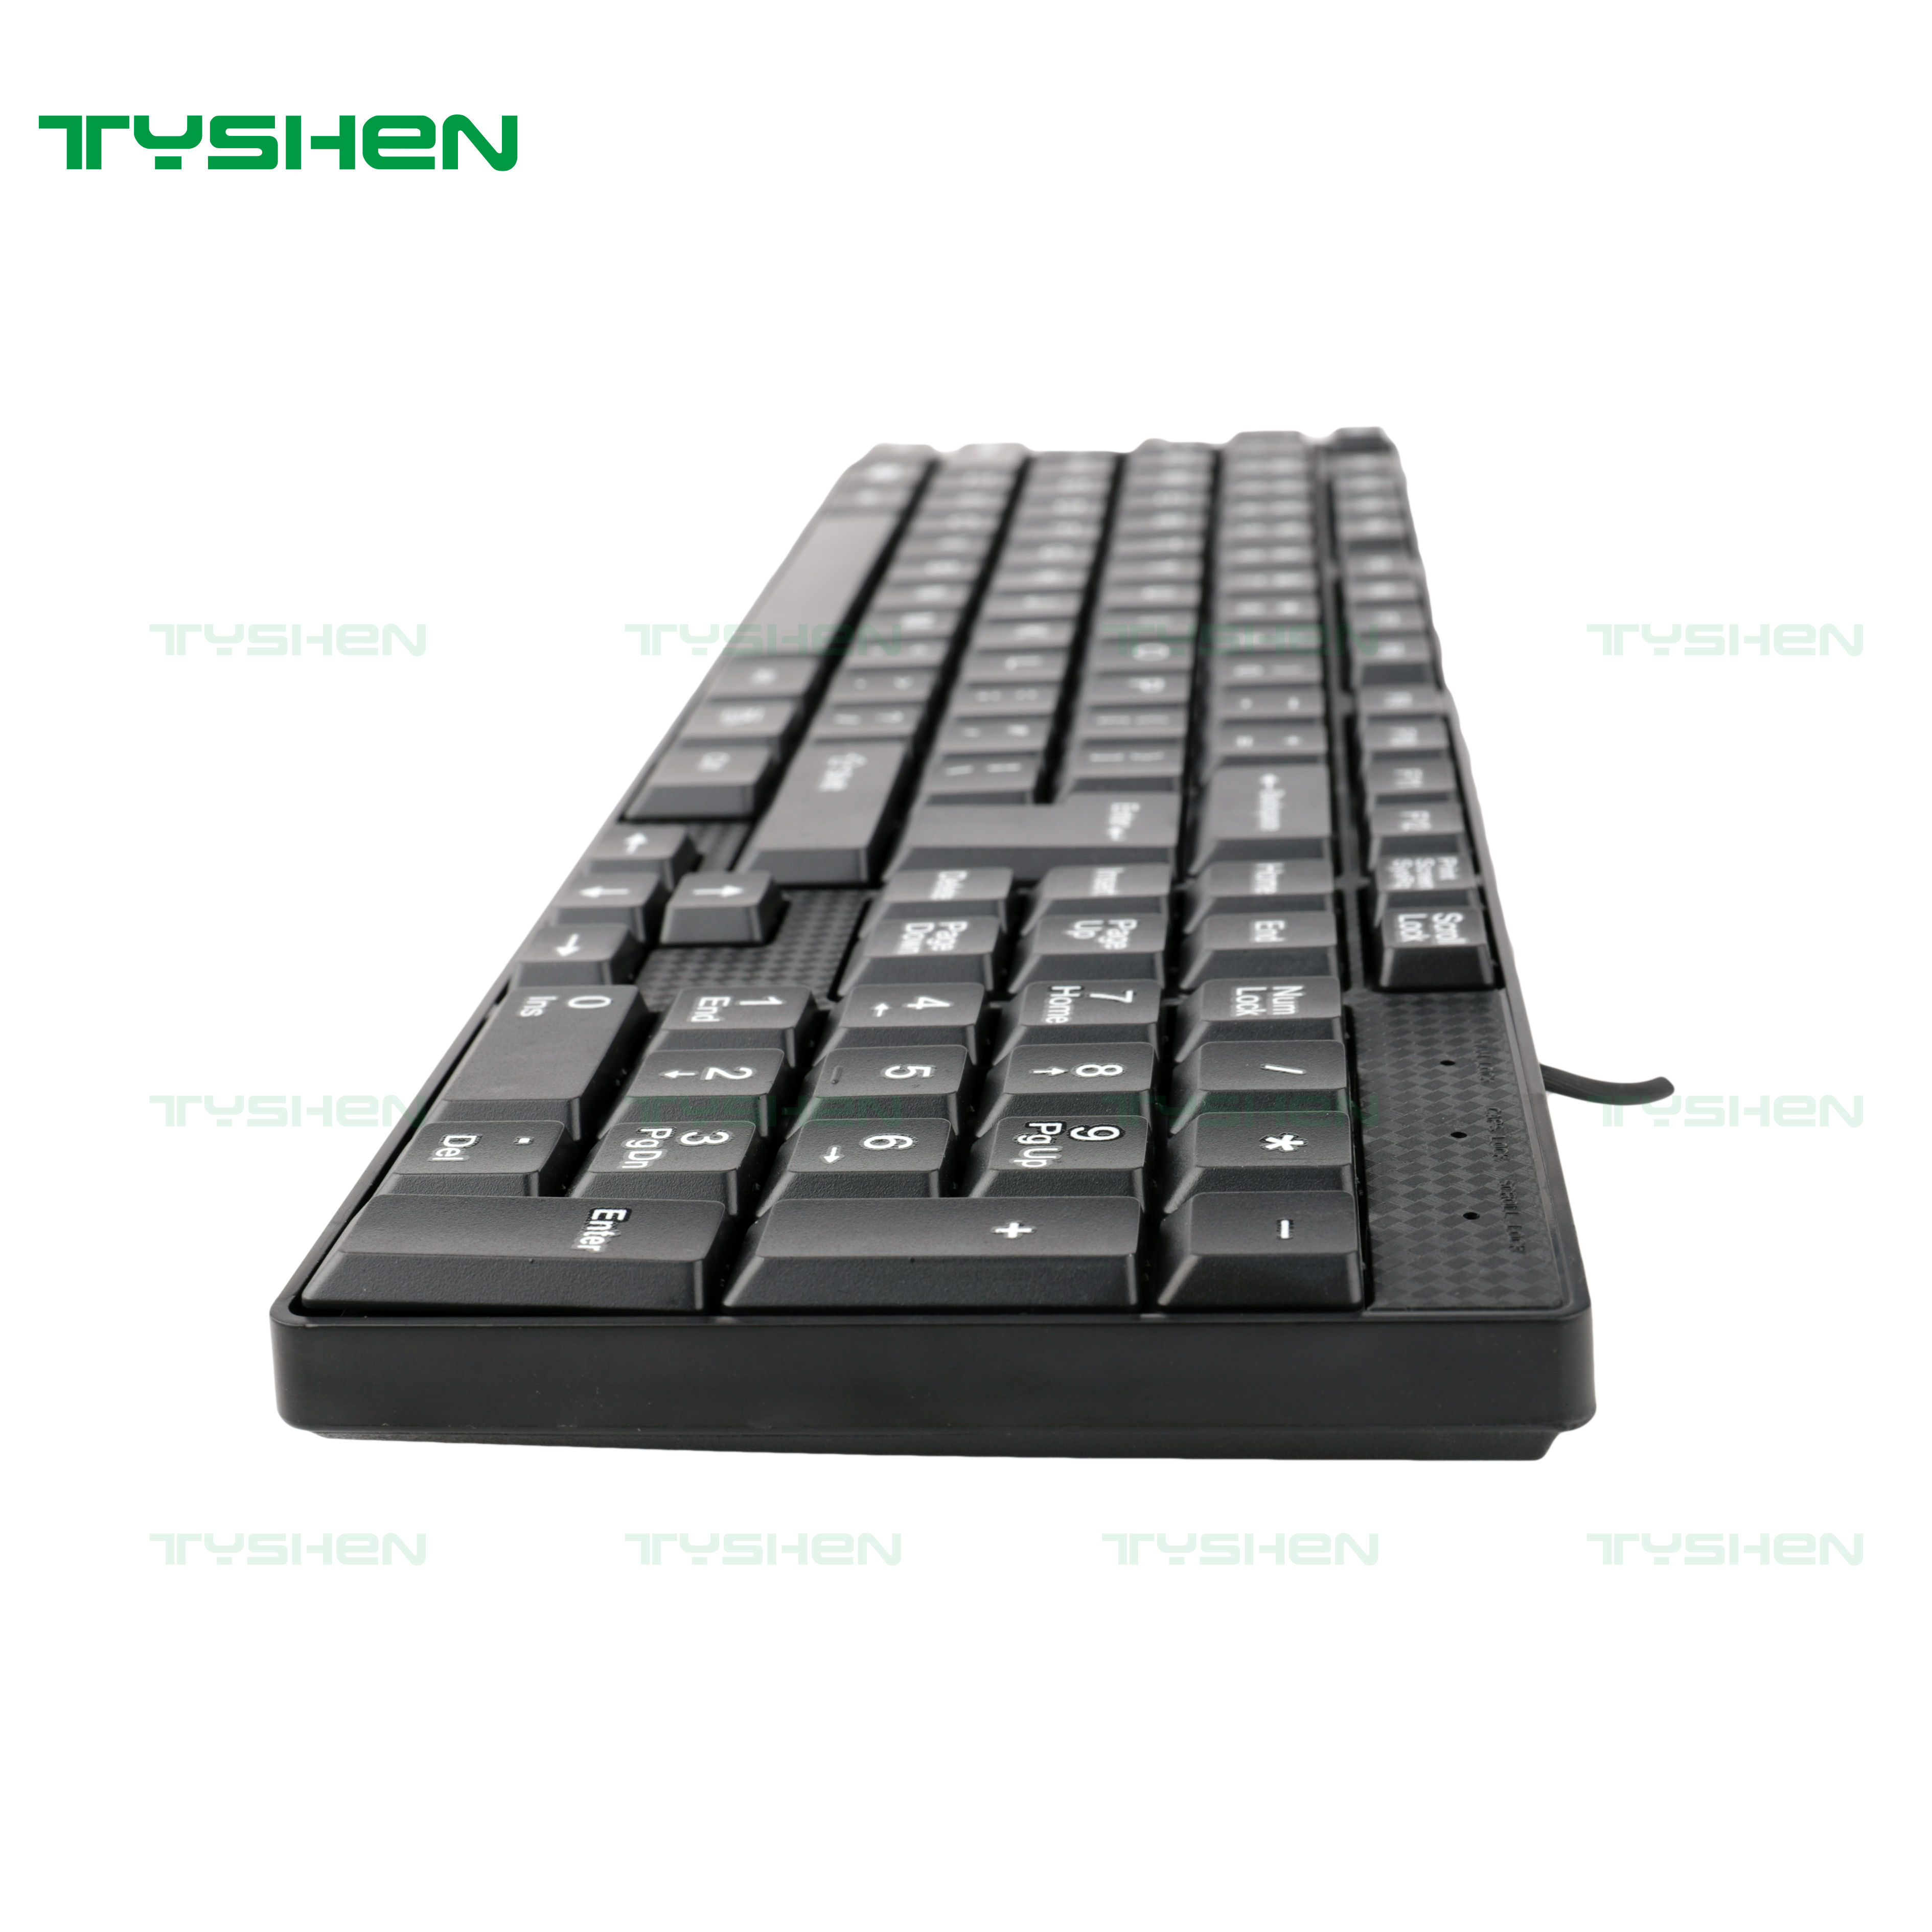 Computer Keyboard, 1.50USD with Fob and Color Box, MOQ 10, 000 PCS